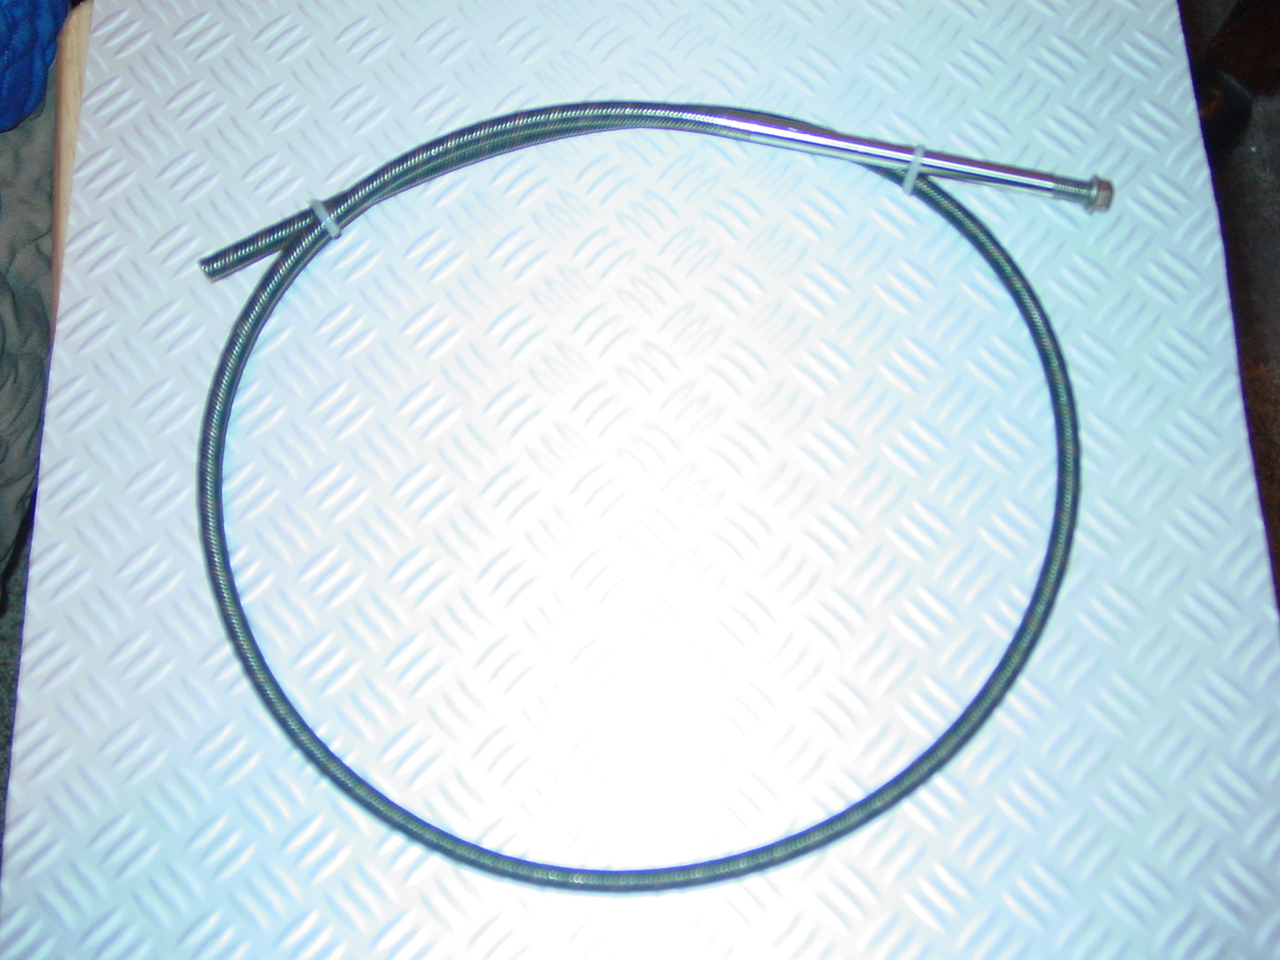 26" 3/16" flexible cable with stub shaft